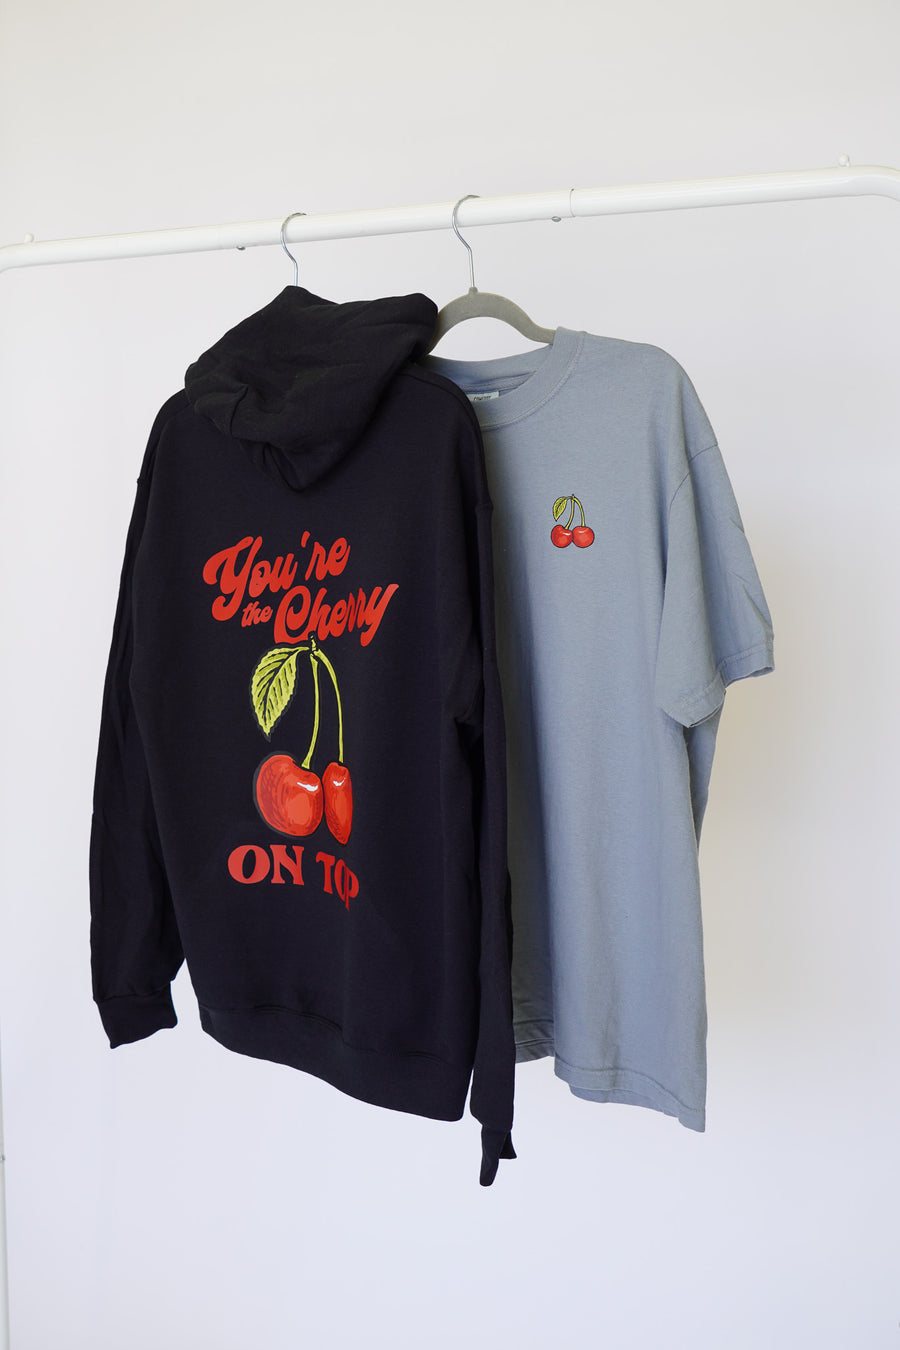 *You're the Cherry on Top Hoodie